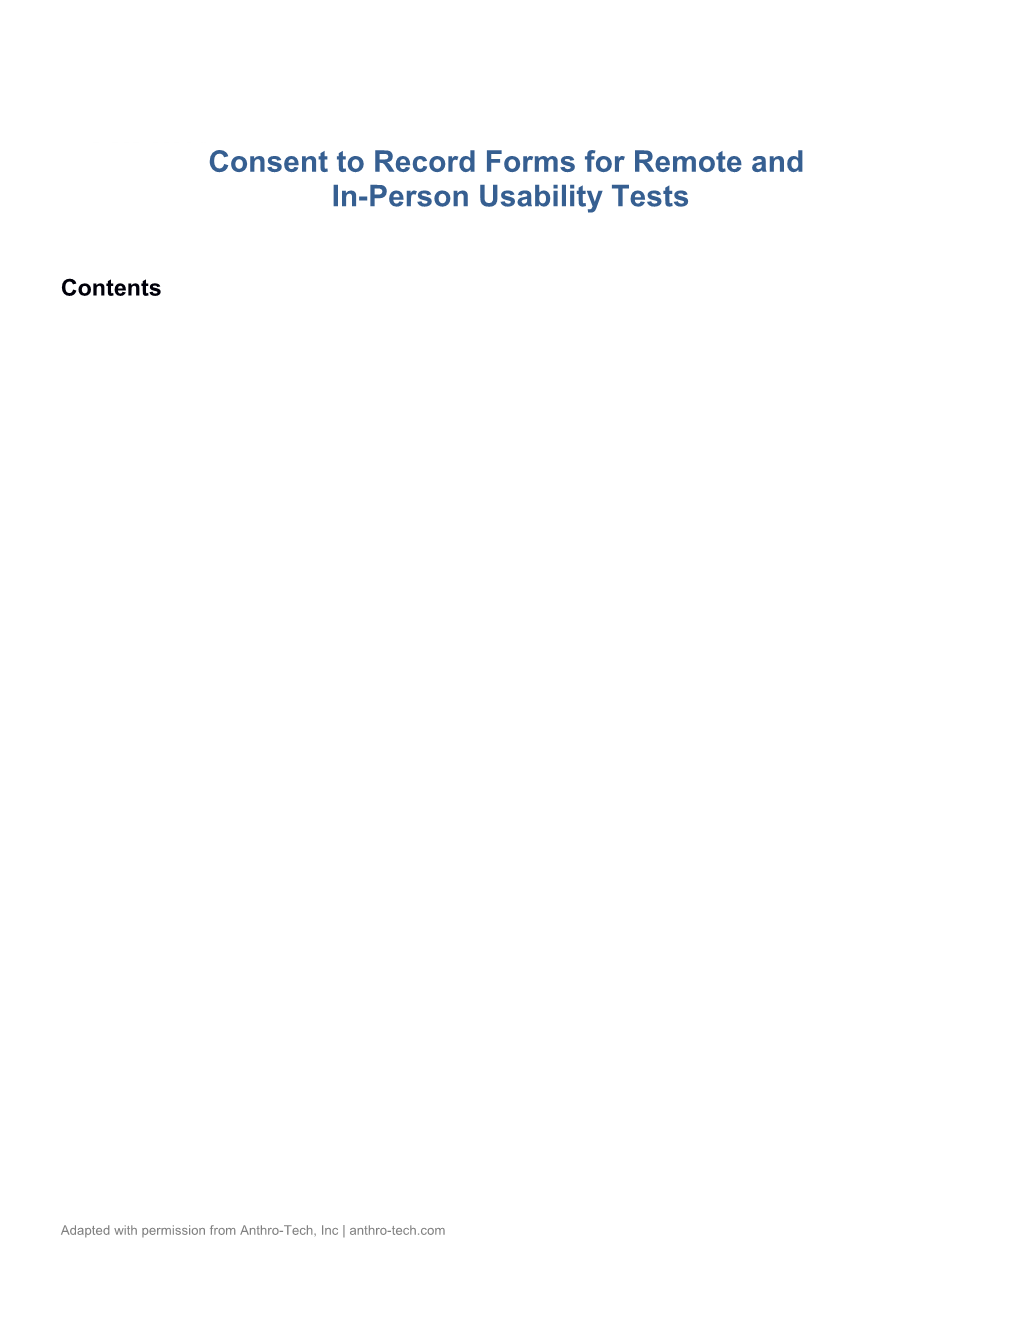 Consent to Record Forms for Remote and In-Person Usability Tests